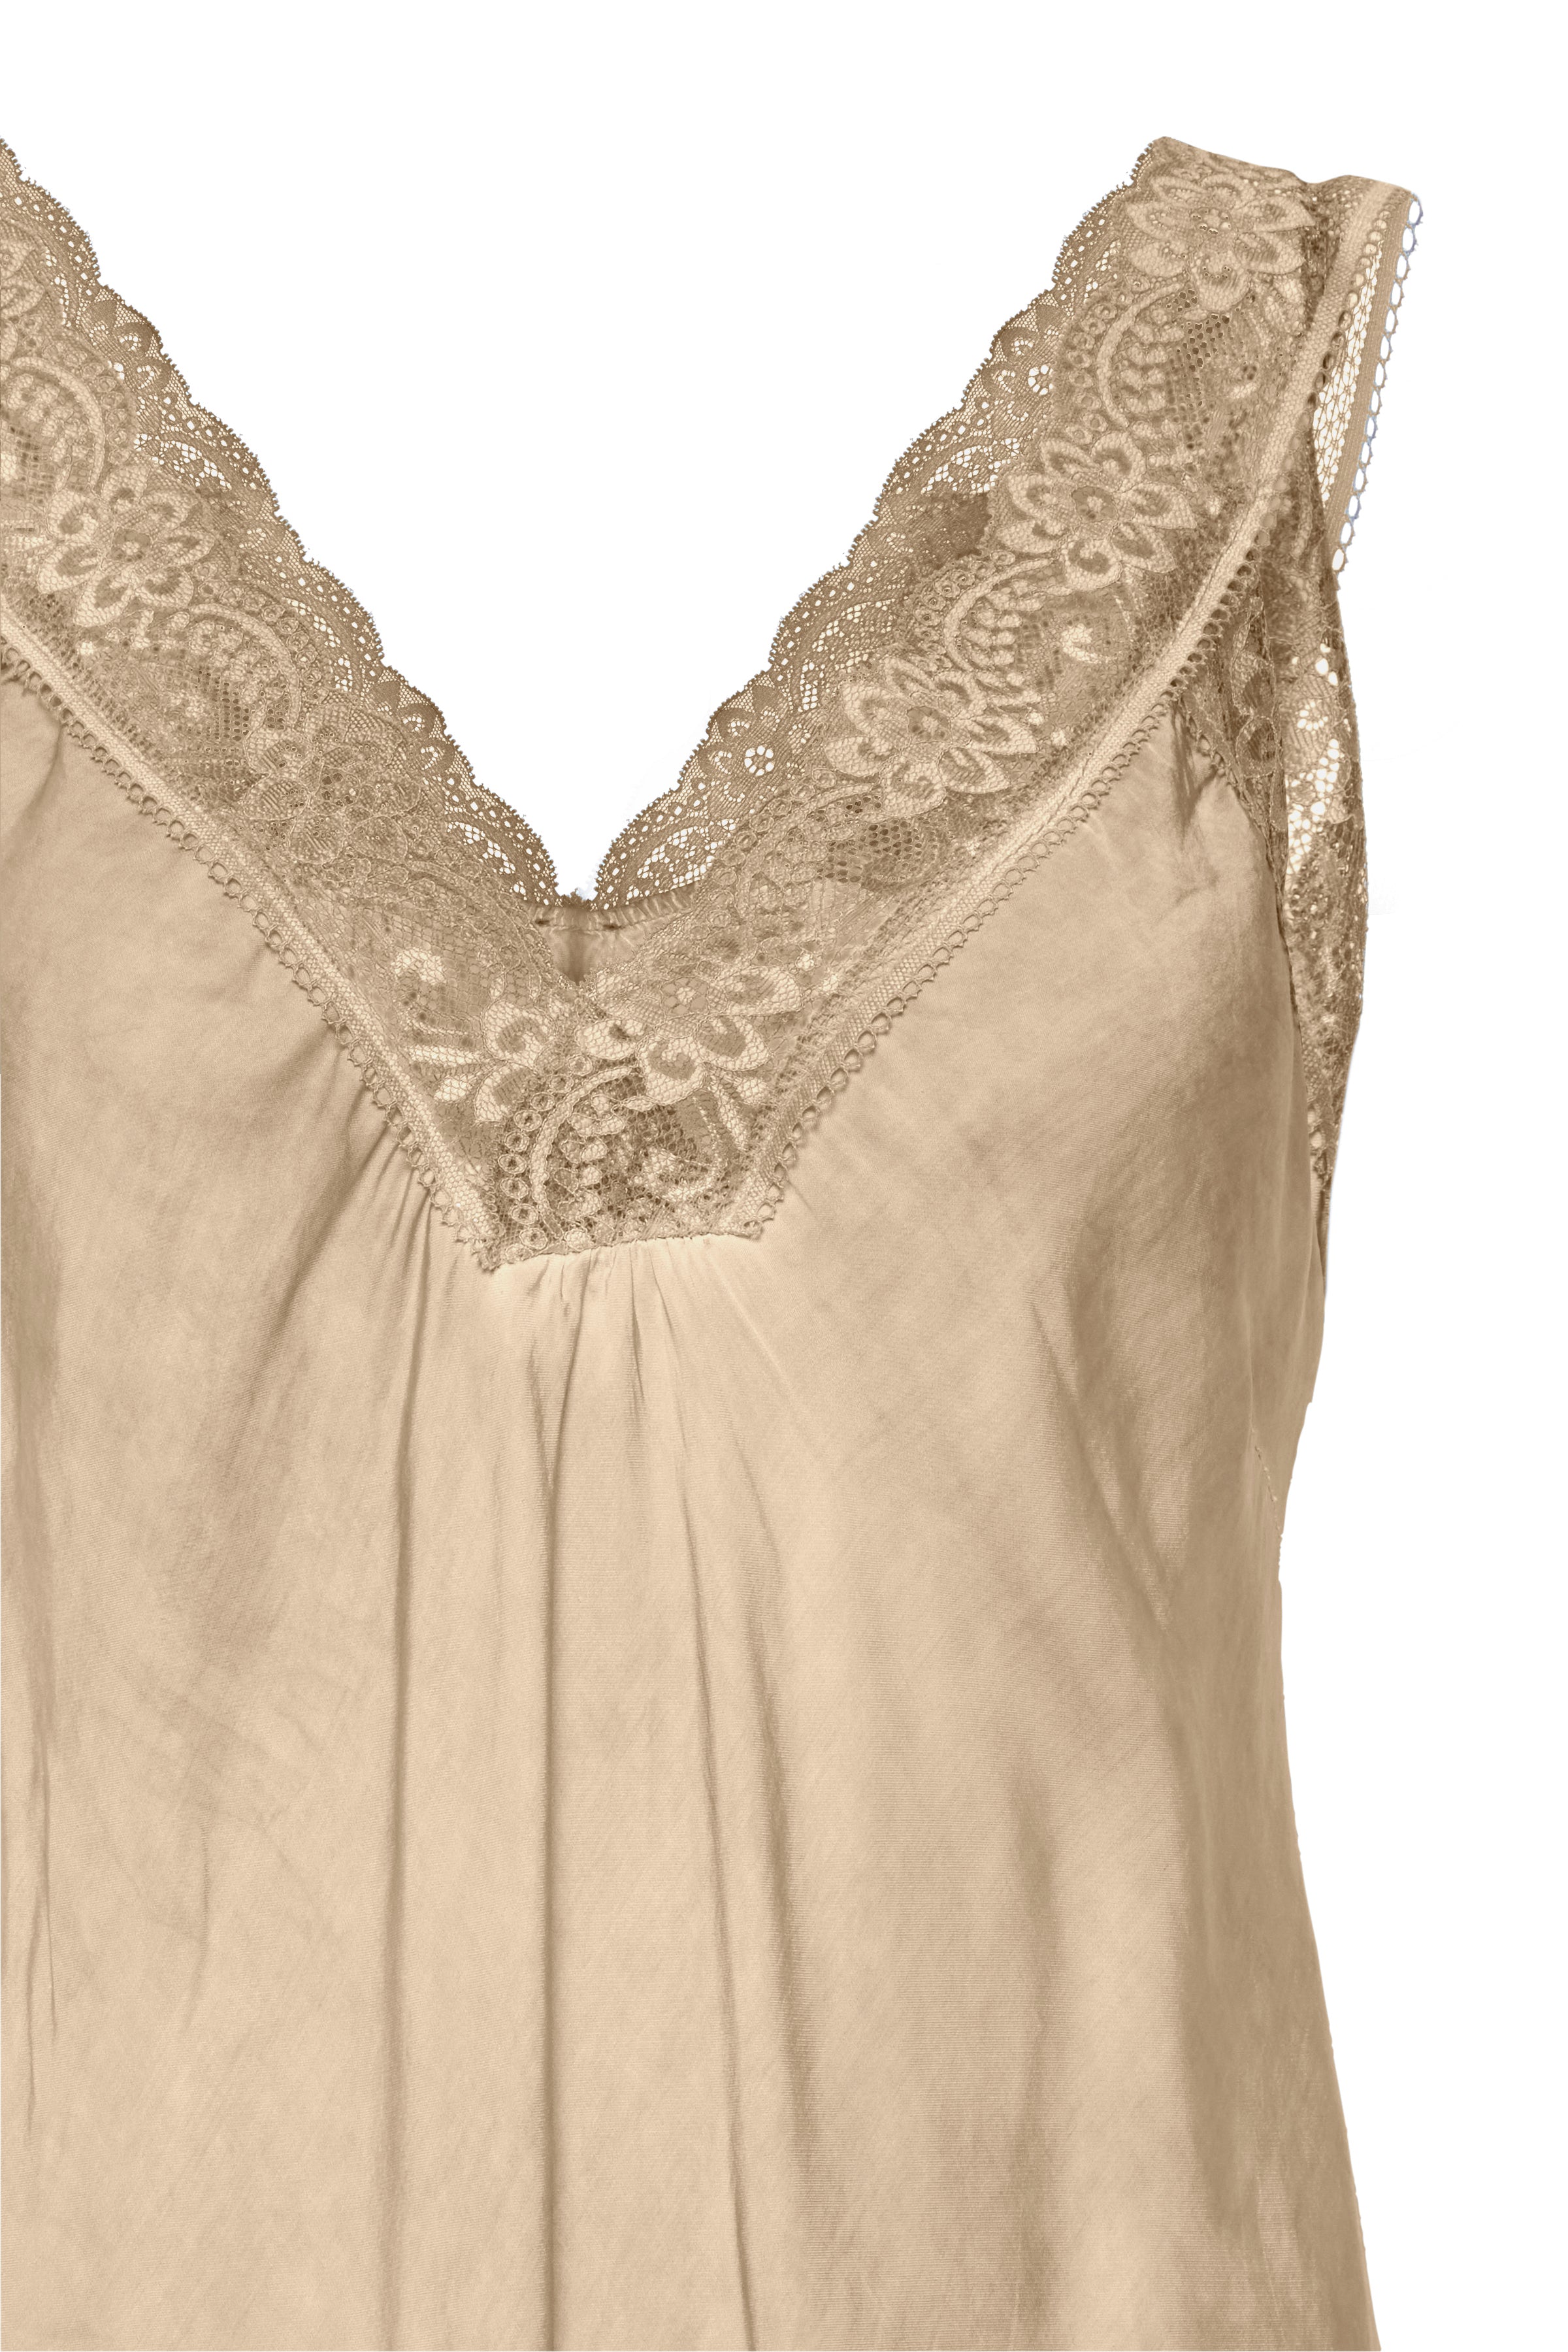 Sblucy lace top fra Sorbet